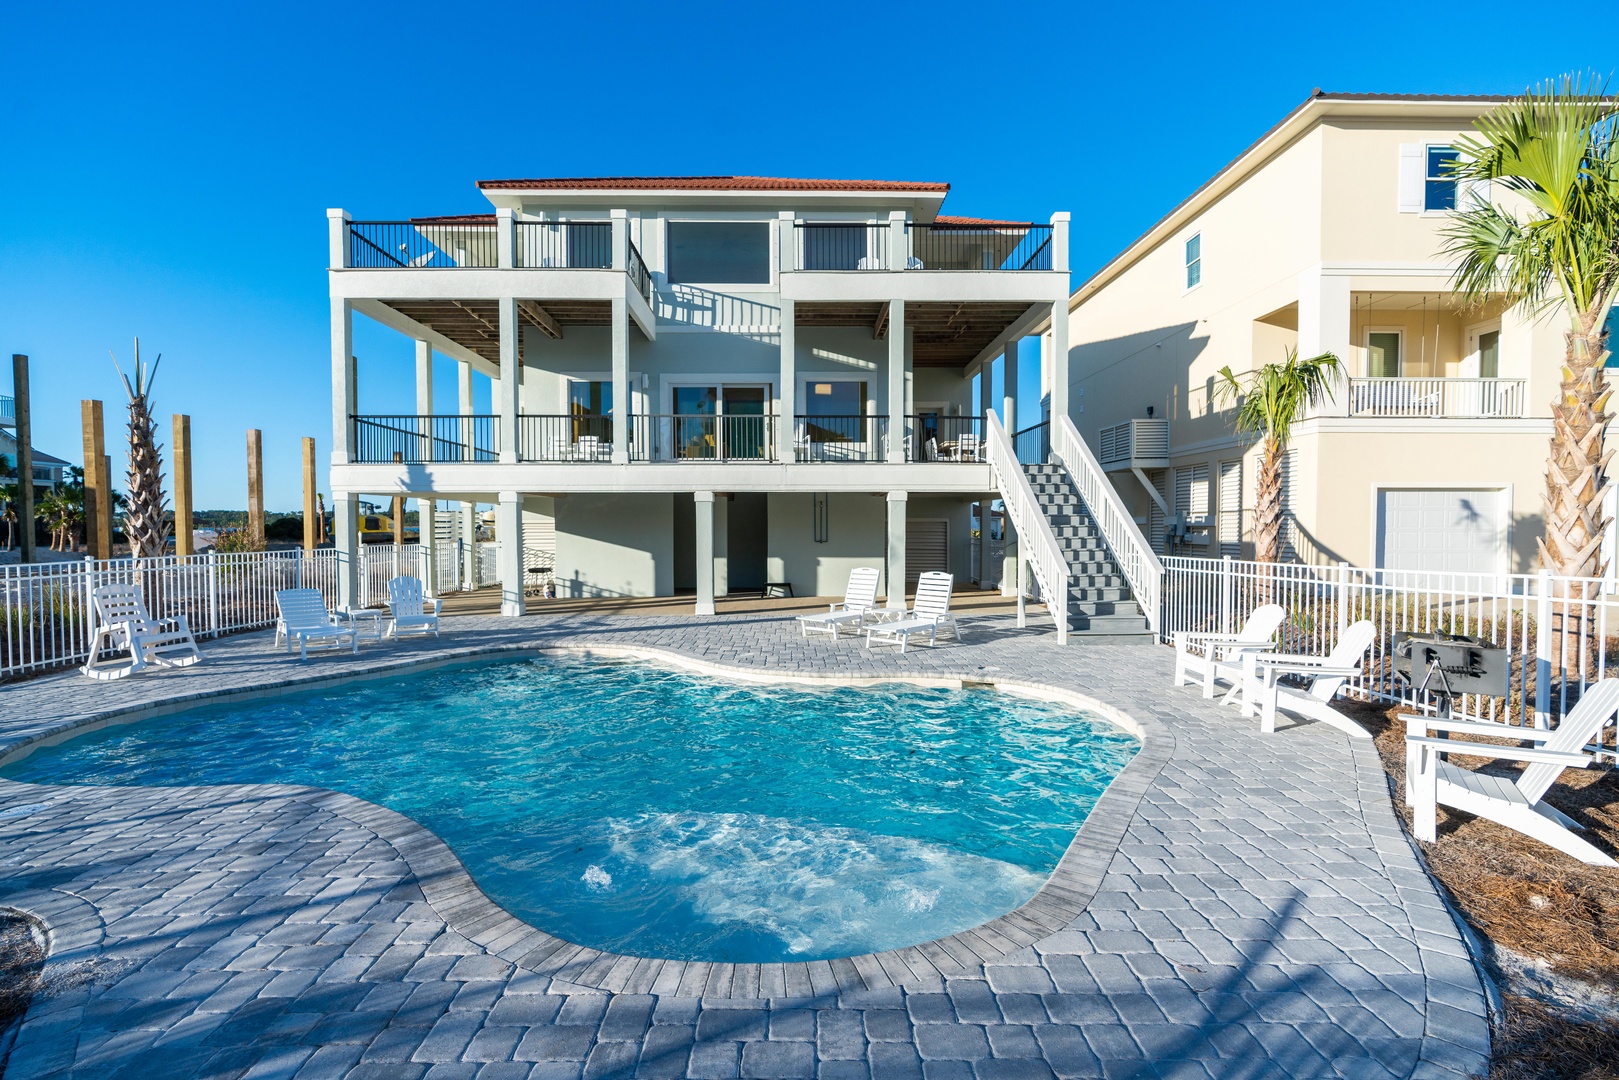 The home has a private pool that can be heated during the cooler months (extra fees apply)